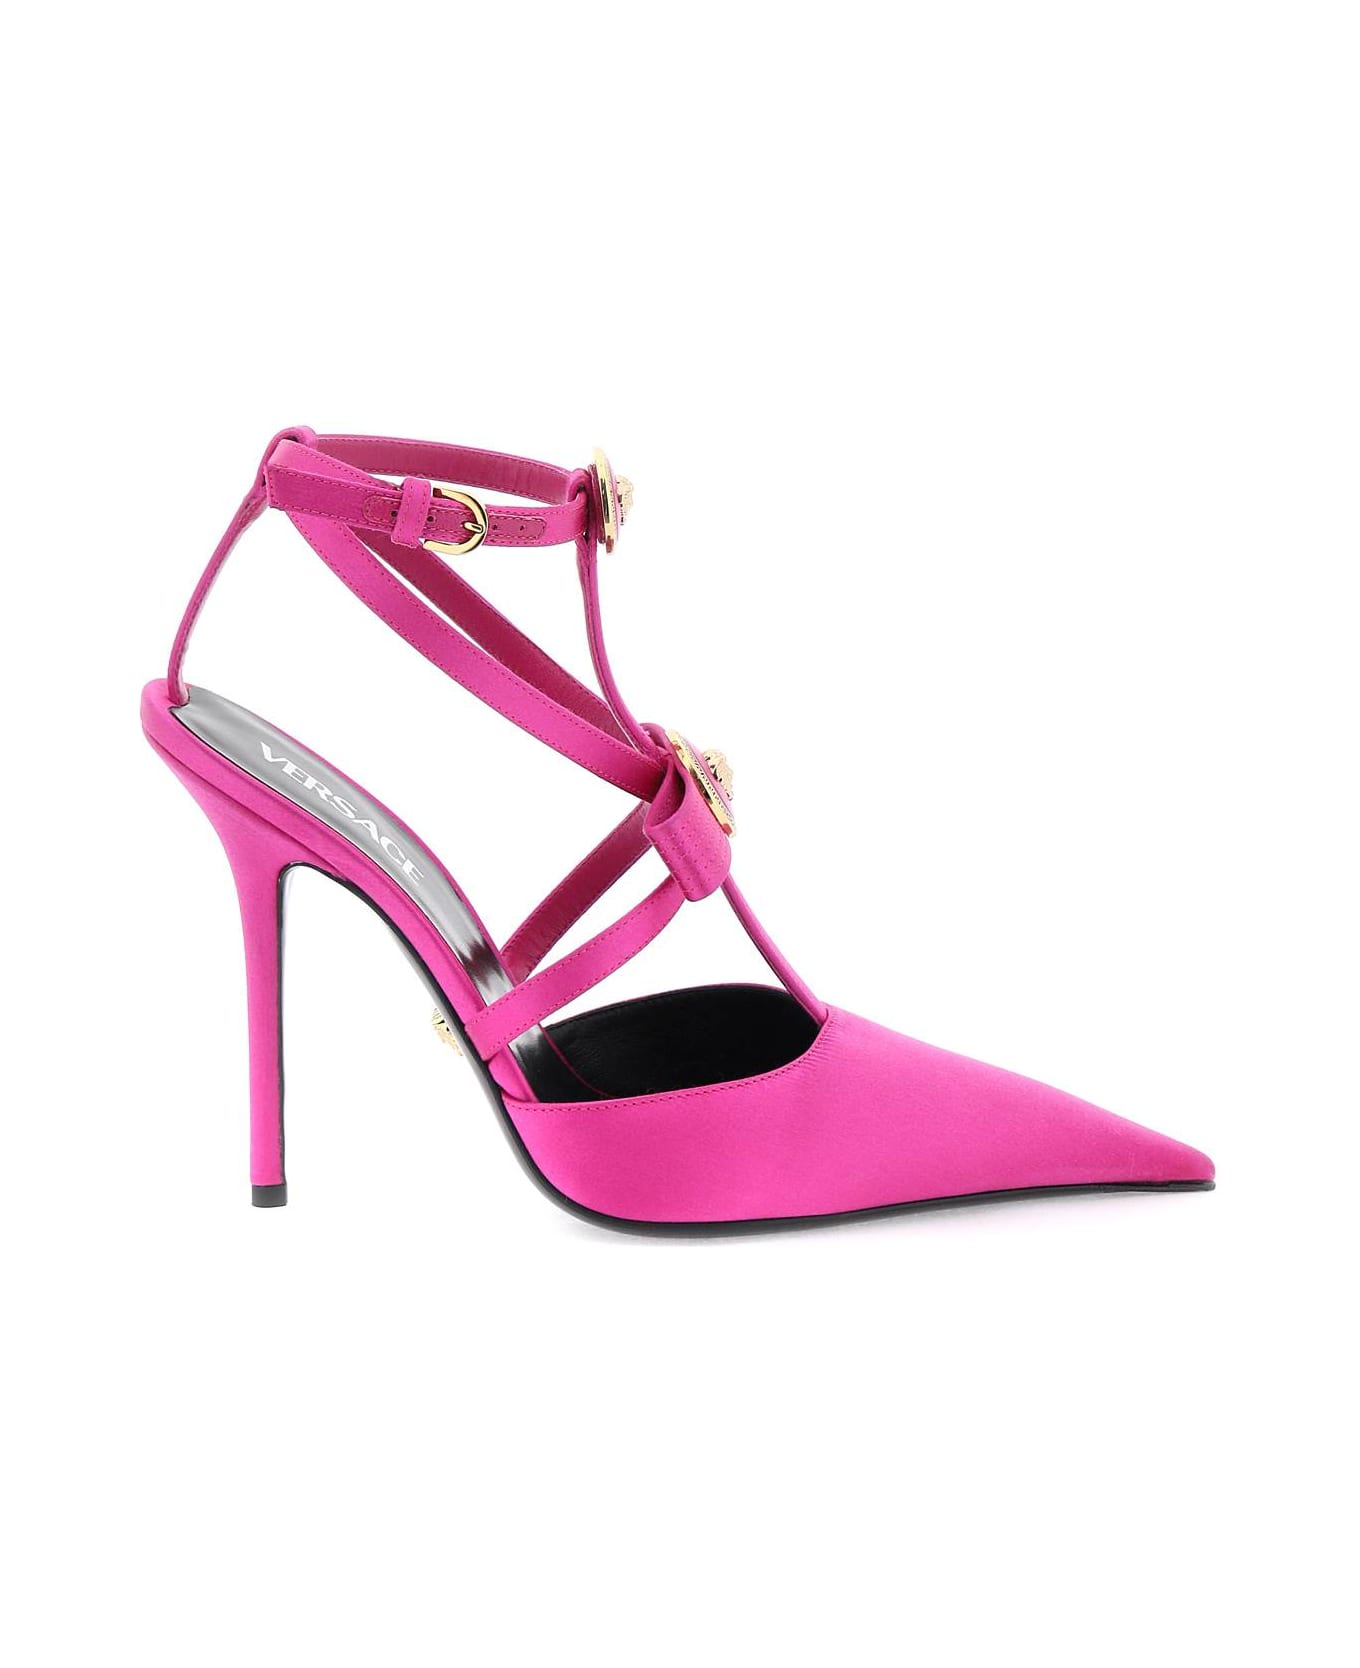 Versace Pumps With Gianni Ribbon Bows - WARTERLILY VERSACE GOLD (Fuchsia)